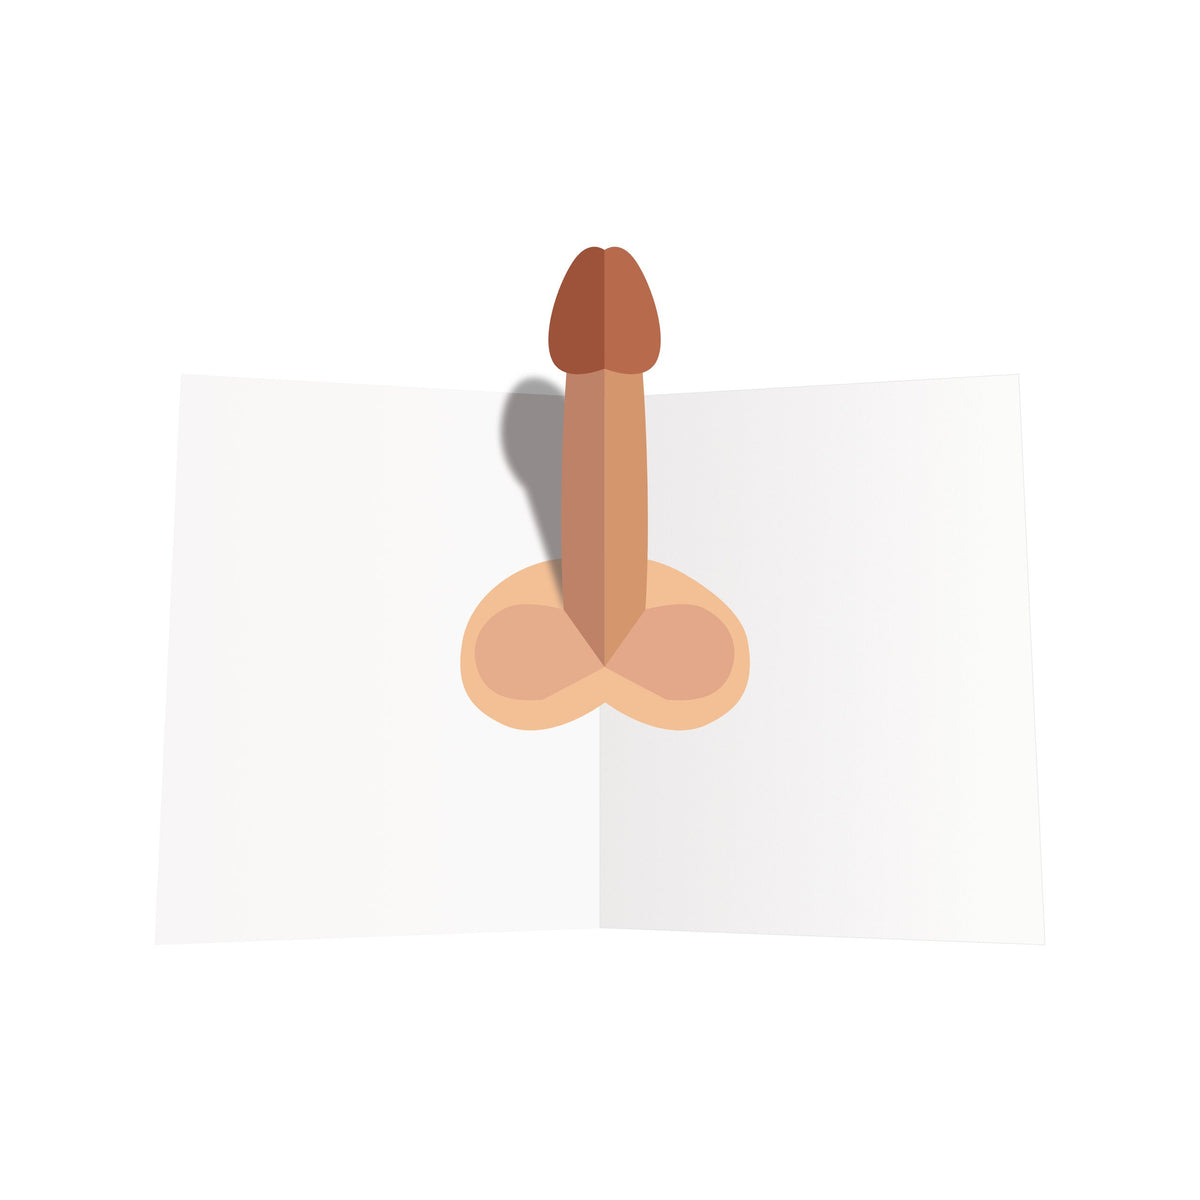 Merry Titsmas- Pop Up Boob Card - Dicks By Mail - Anonymously mail